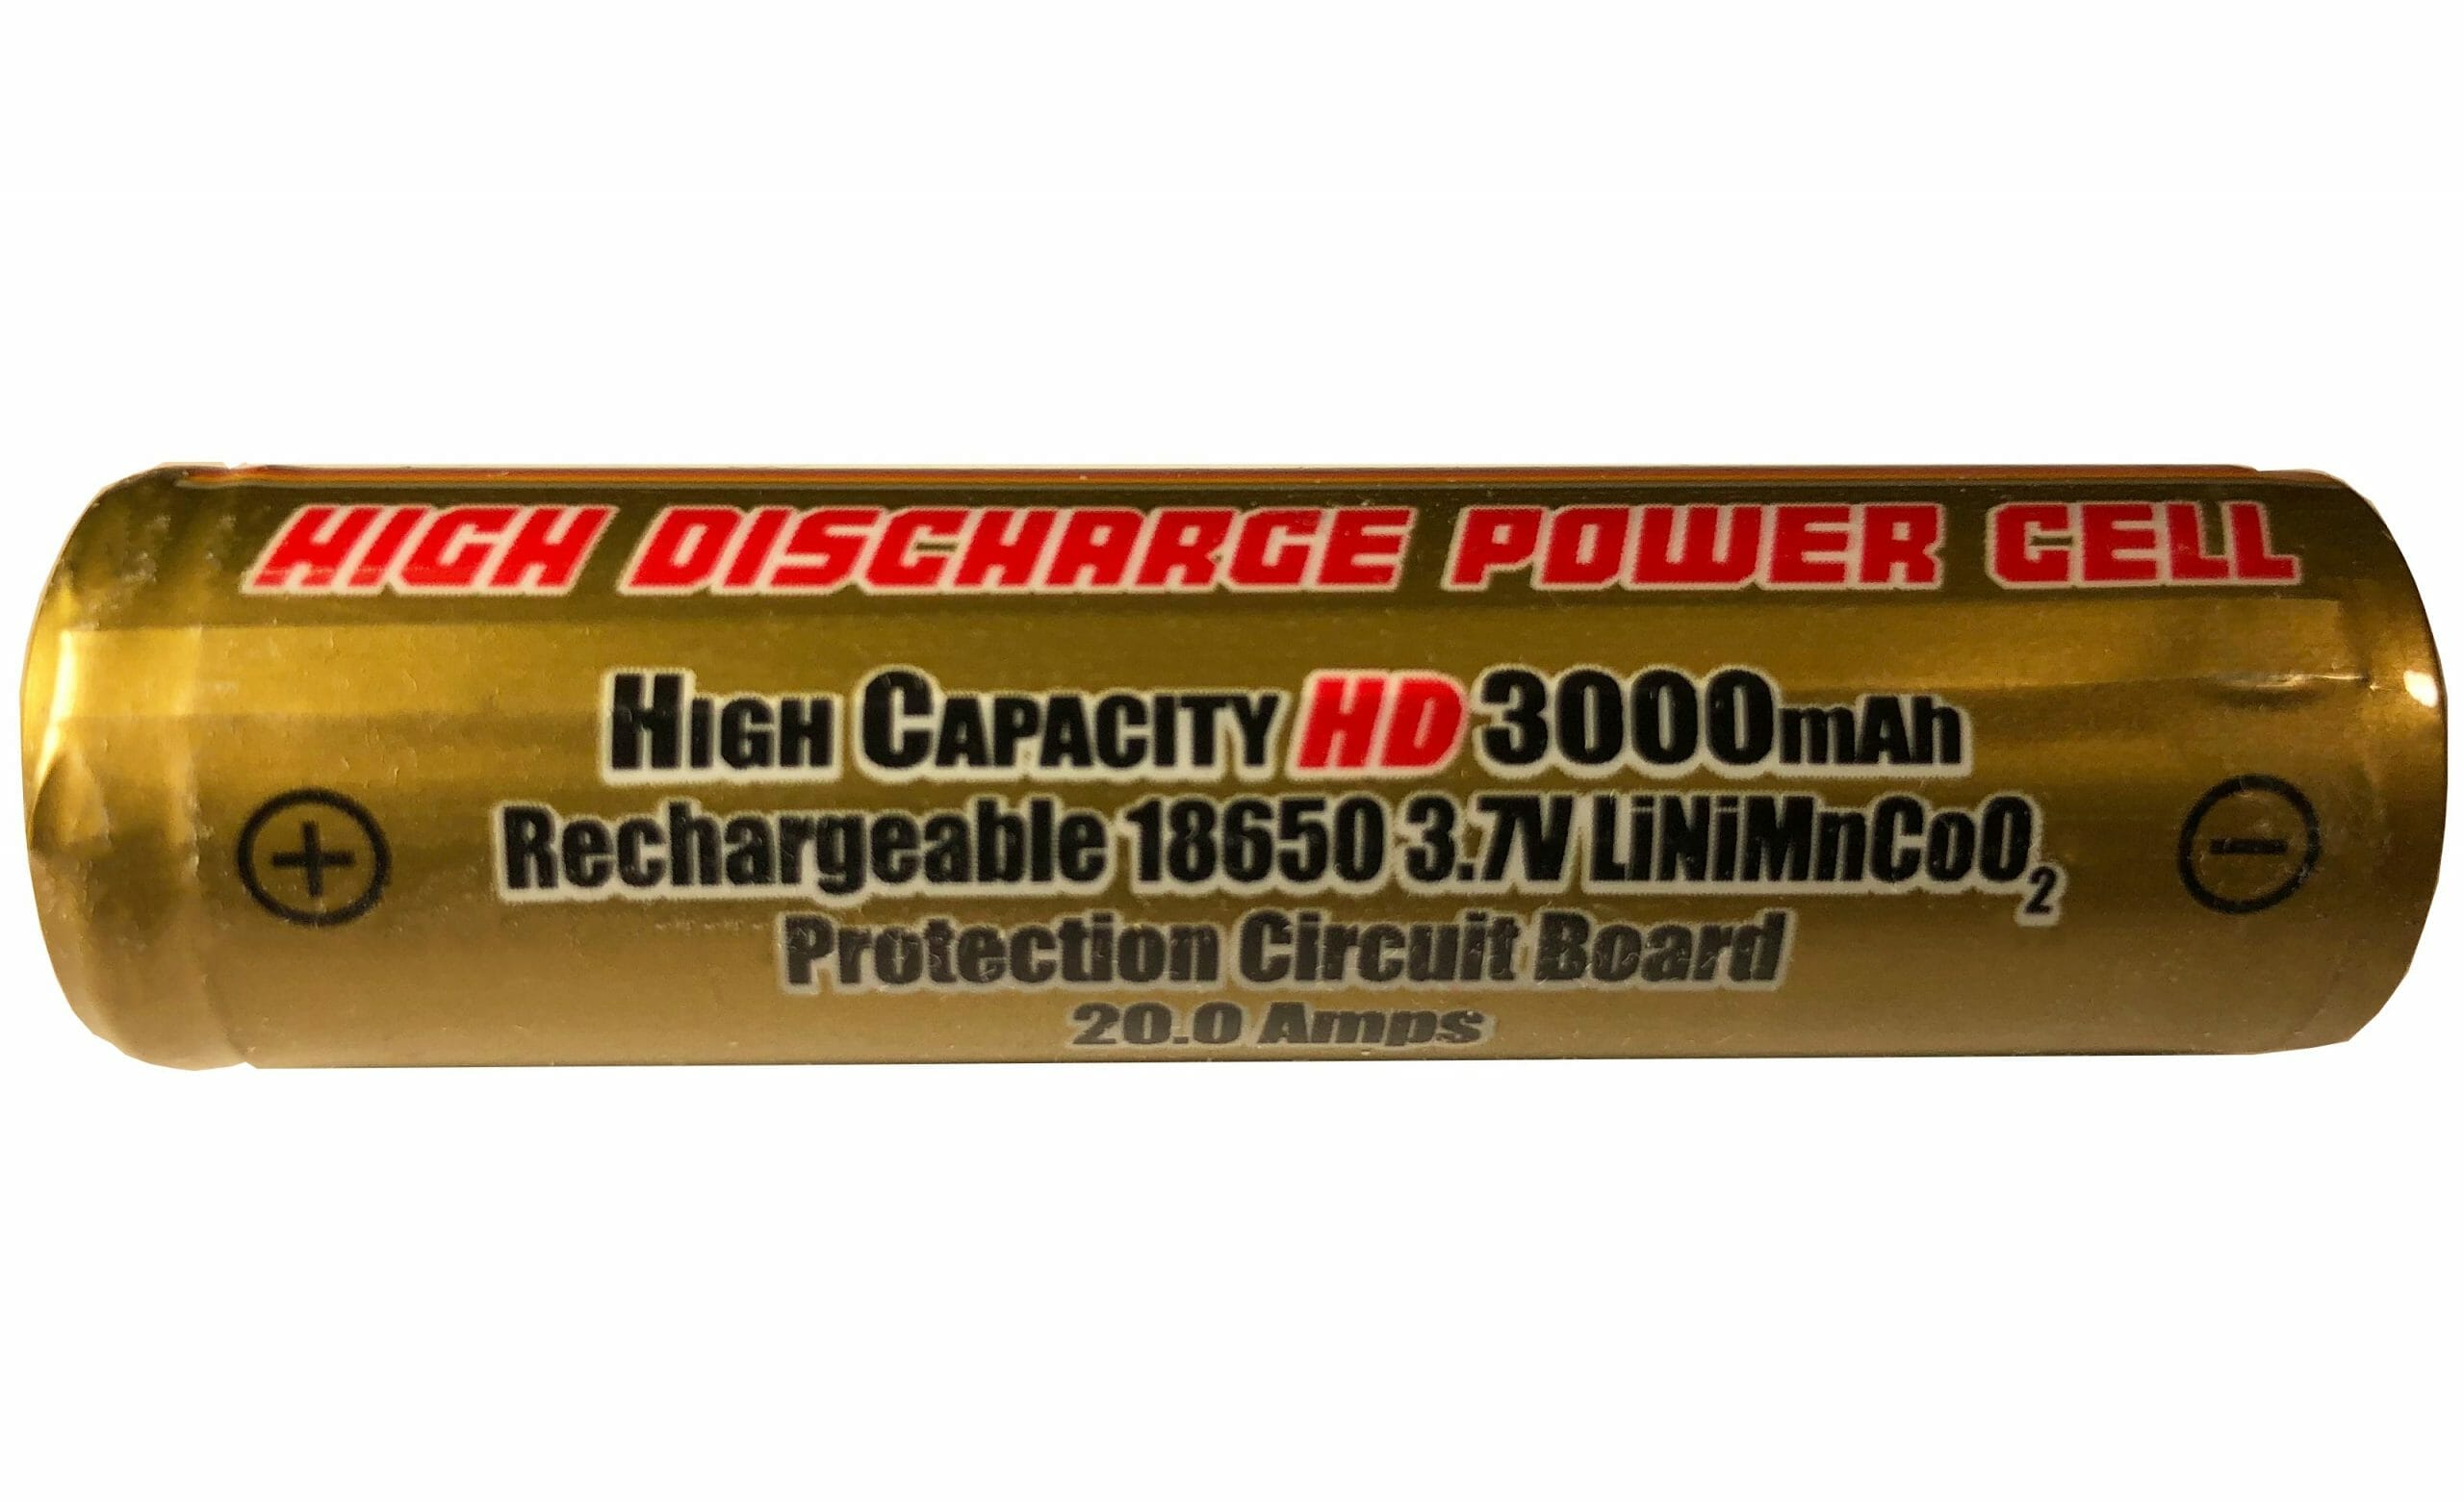 Discharge 3000mAh, 3.7v, 18650 LiNiMnCo02 Rechargeable Battery - MF Tactical